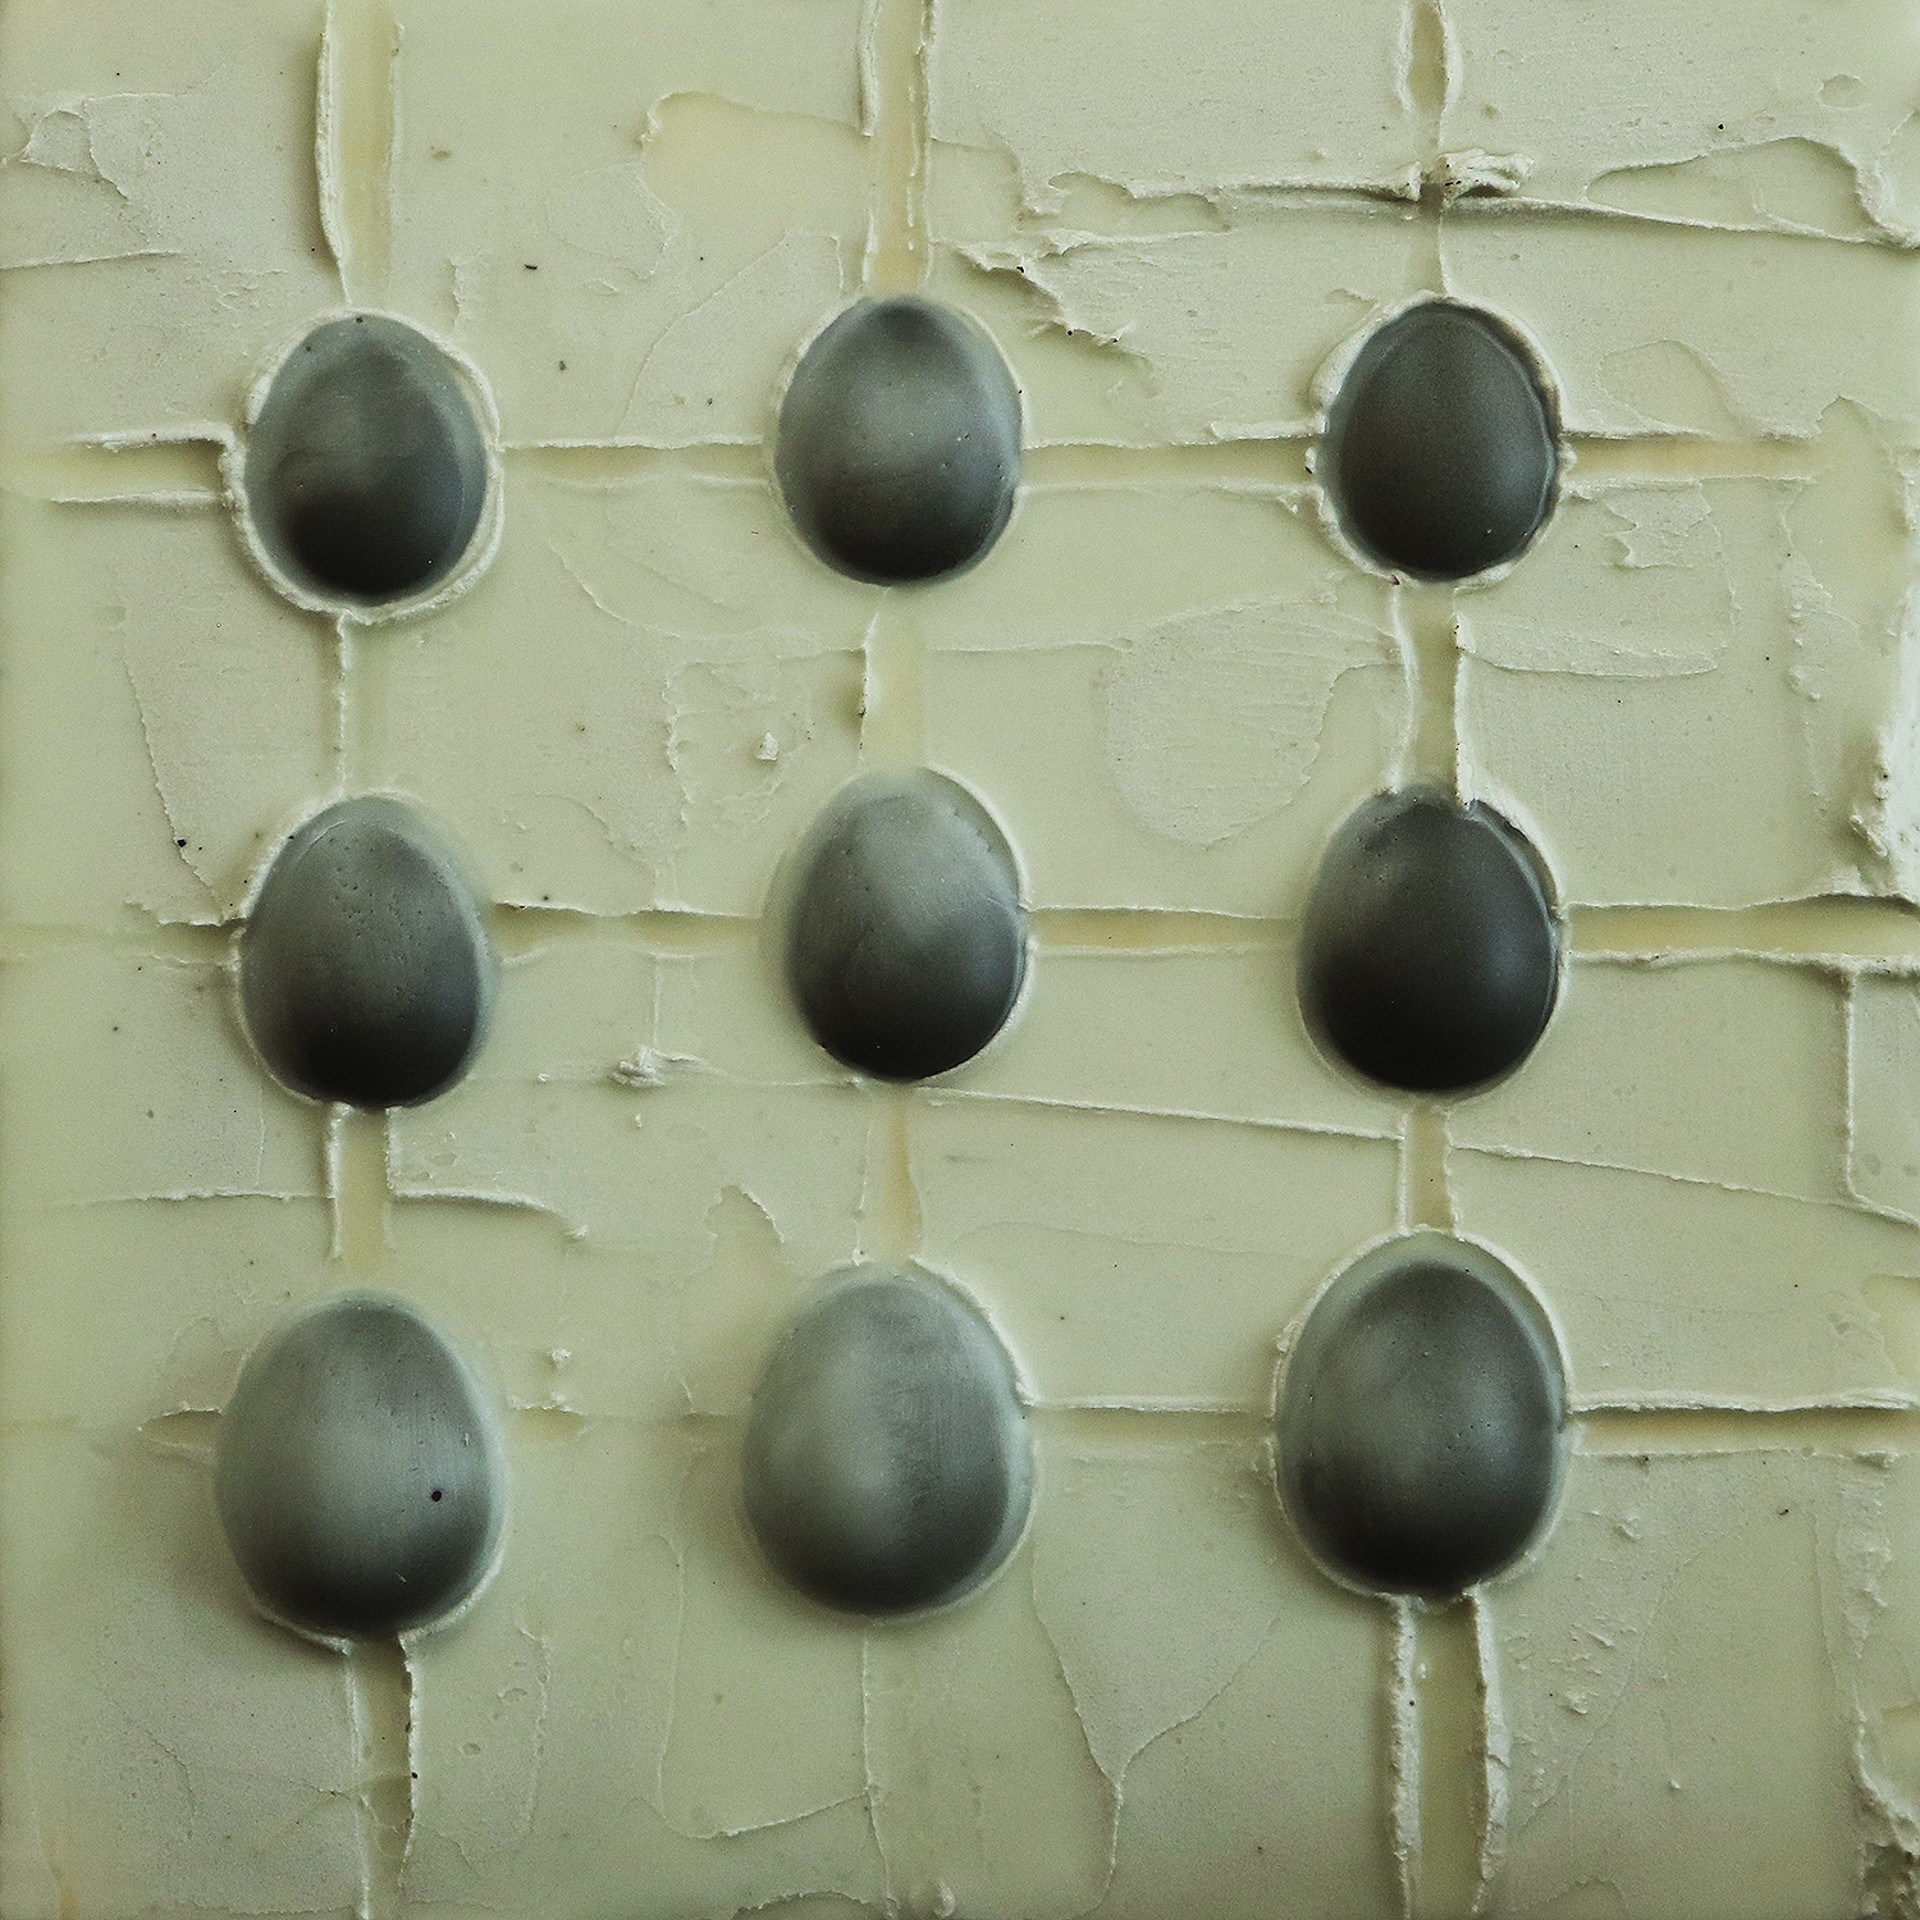 Cracked Egg Soup 3 By Scott Connelly Art One Gallery Inc 